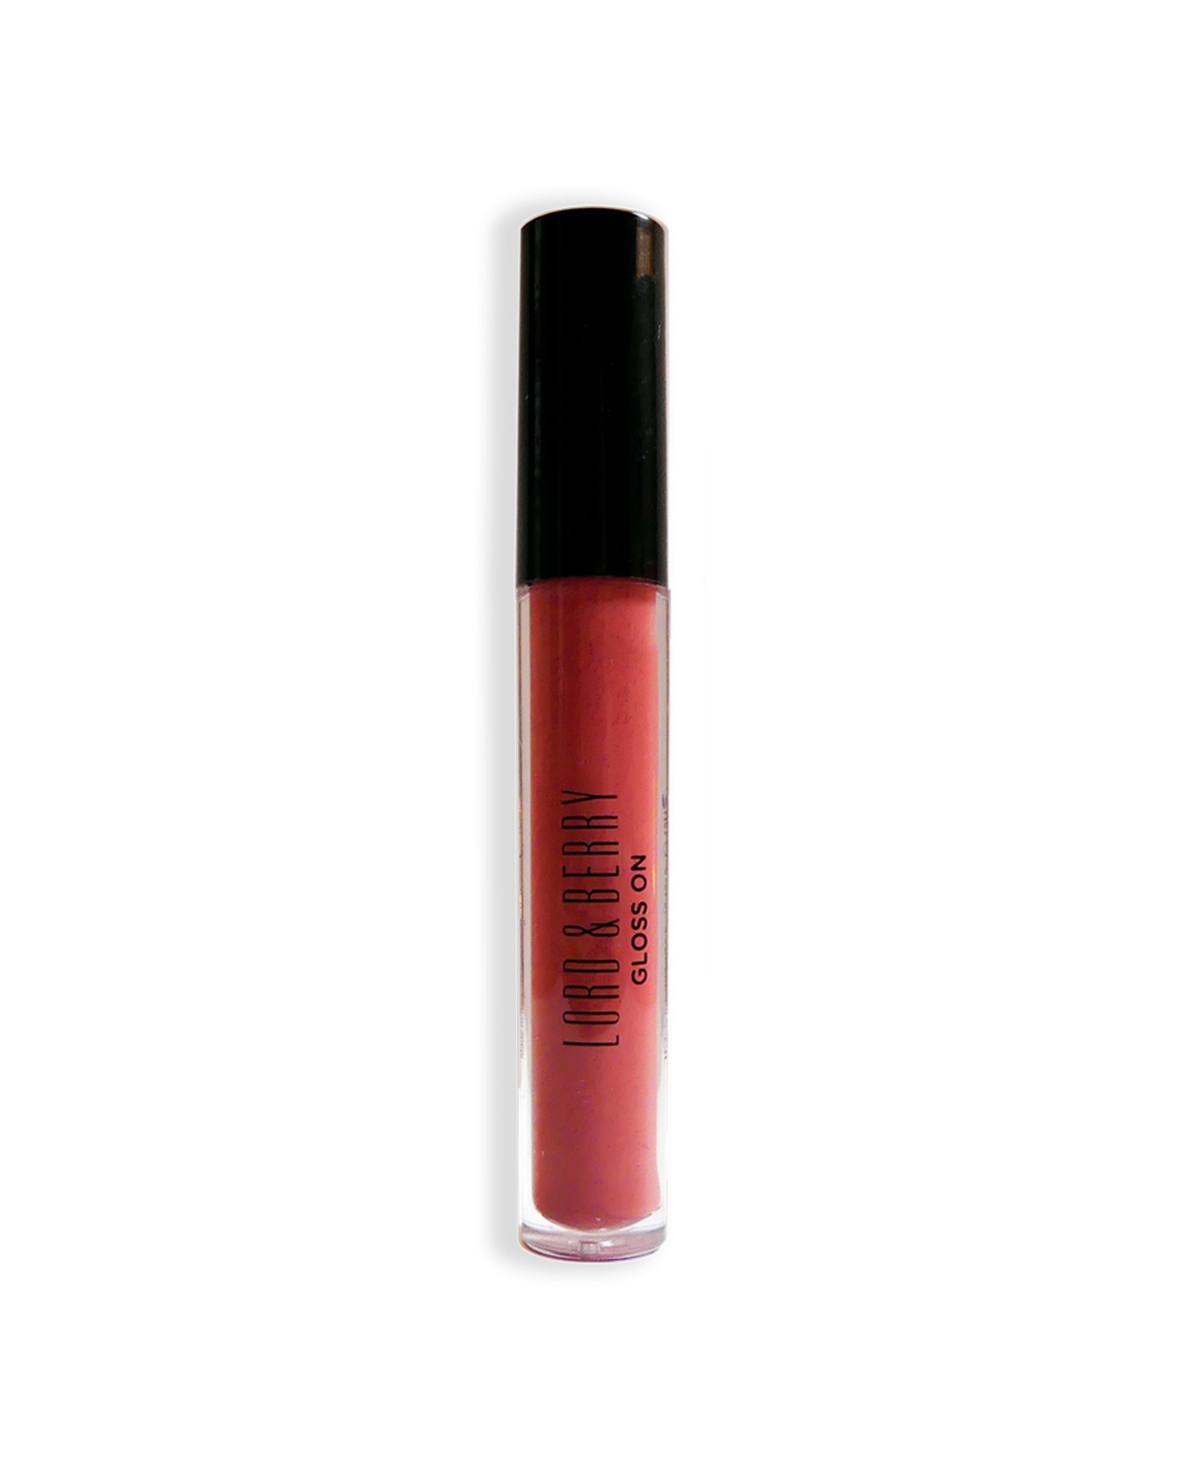 Lord & Berry Gloss On Lip Gloss, 5.5g. In Love